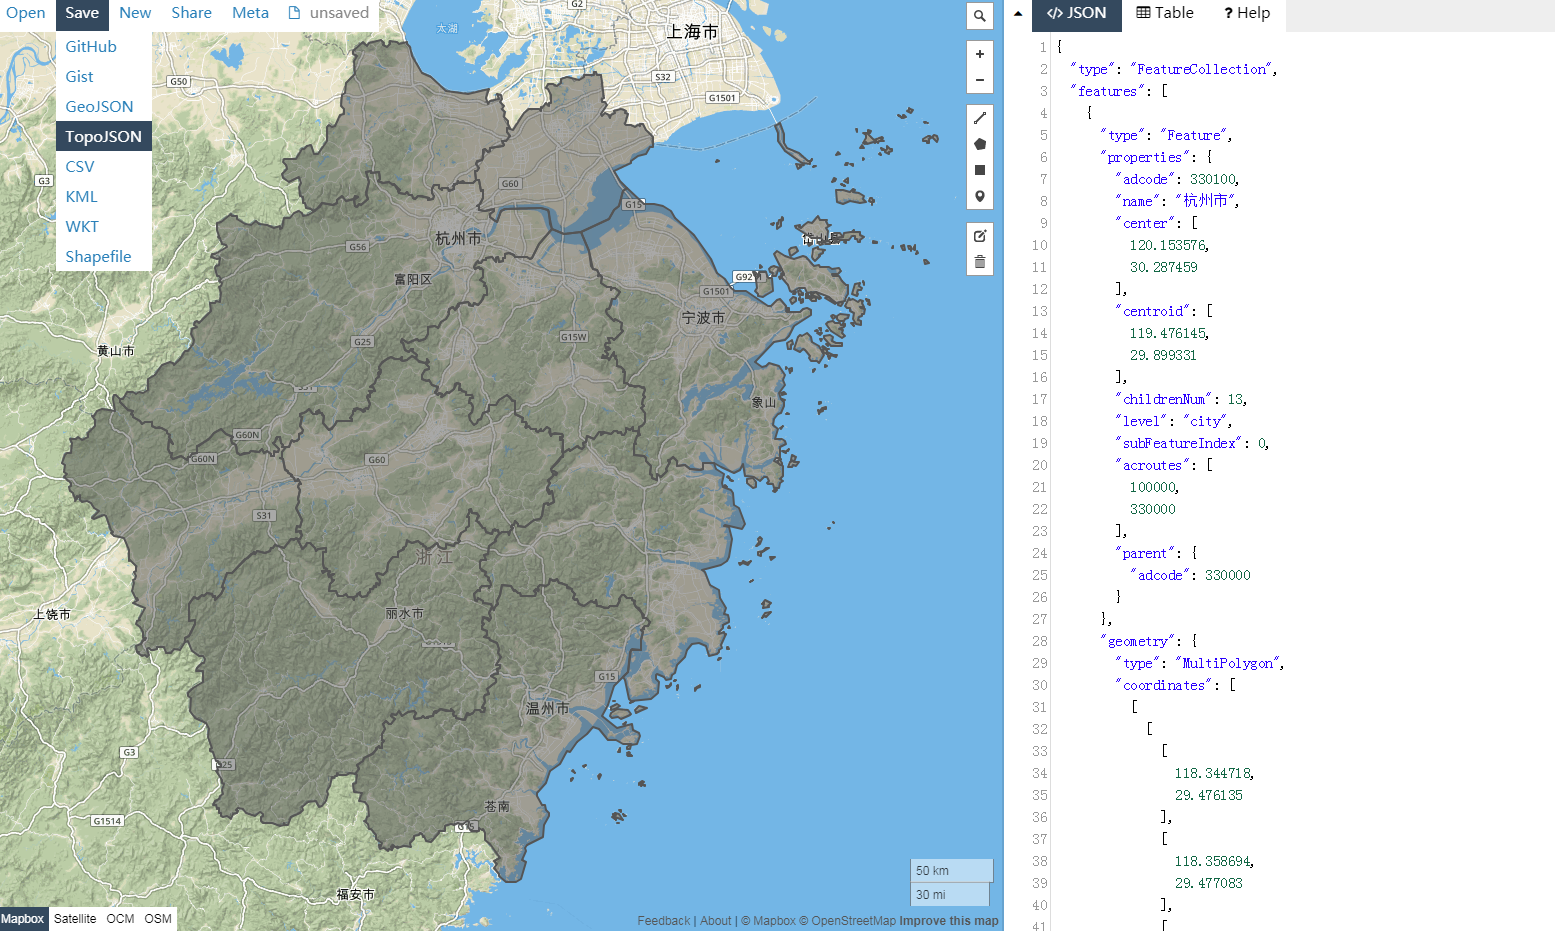 Obtain the topo_json file of Zhejiang Province